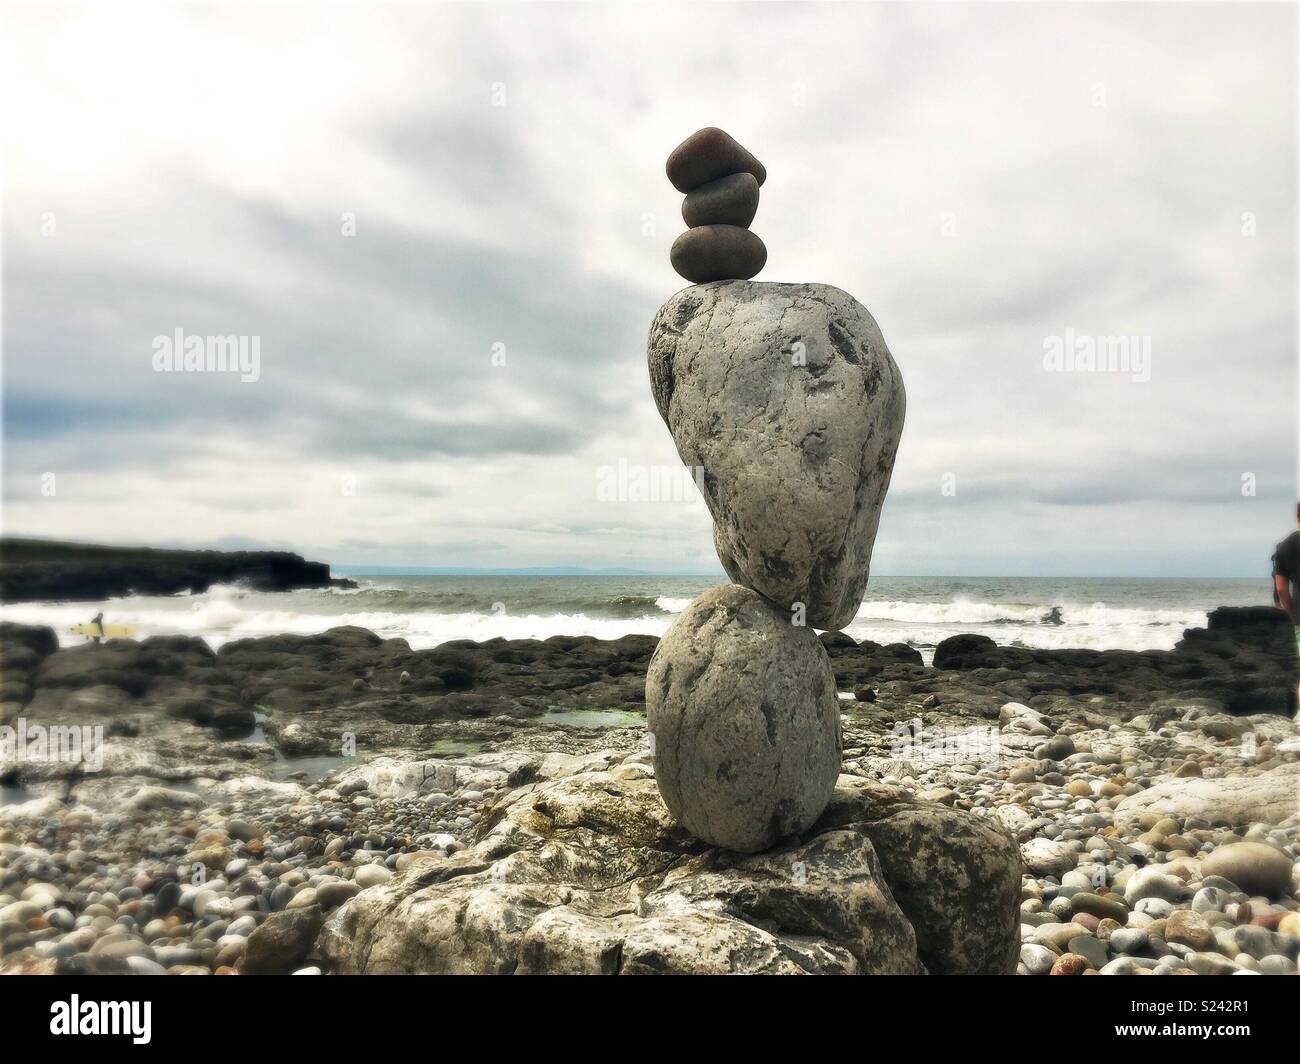 Natural stone balancing sculpture on beach with waves. Stock Photo